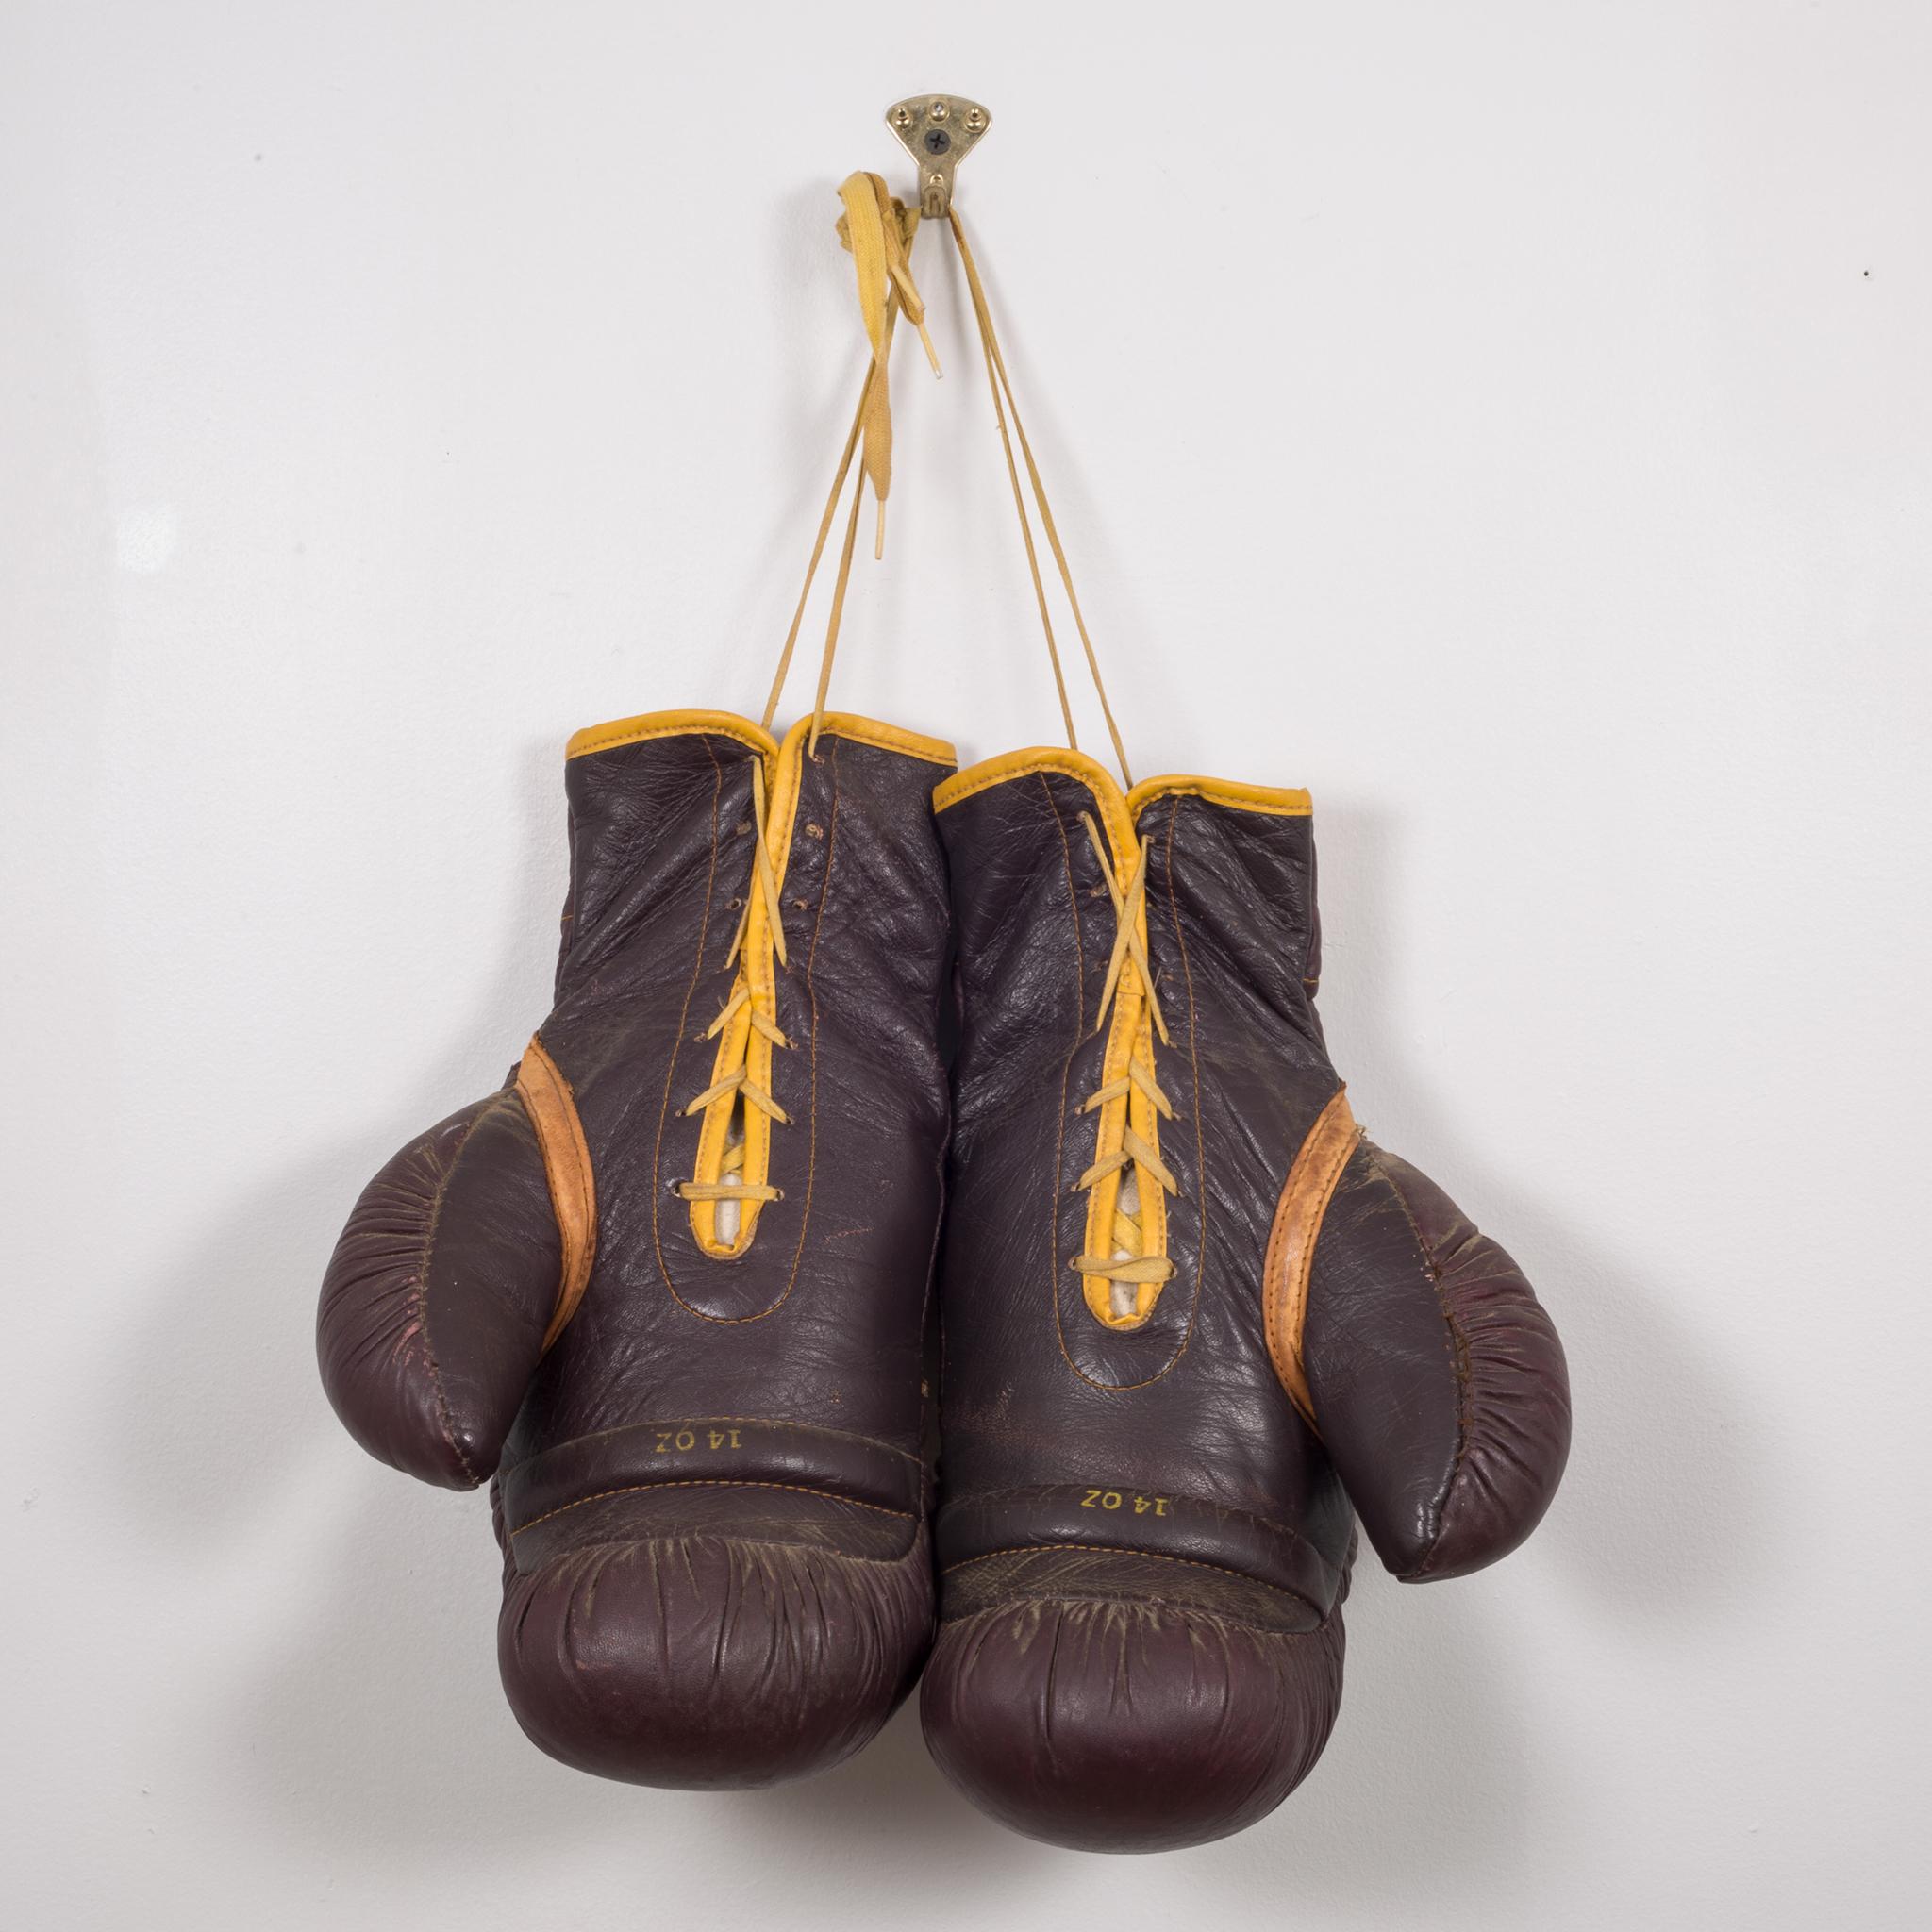 About:

This is a original pair of Everlast leather boxing gloves. The boxing gloves are brown leather with gold leather piping, yellow laces and a leather 